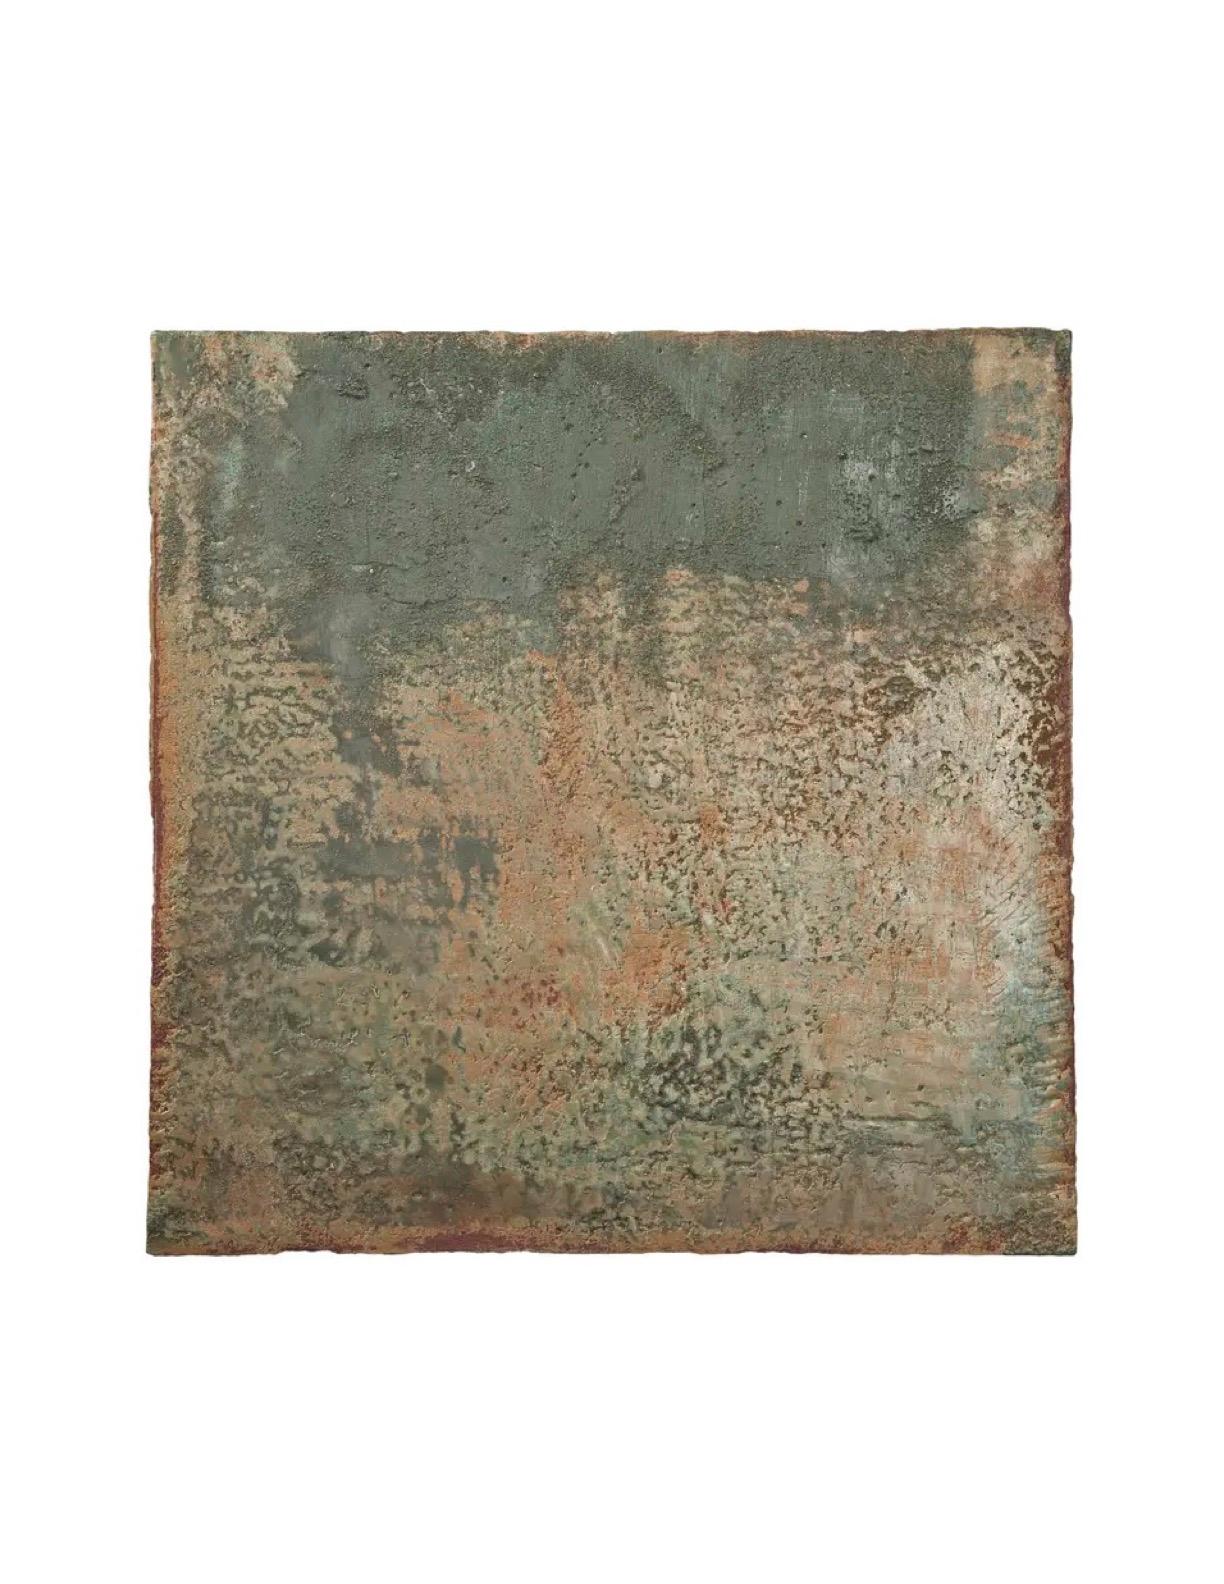 Modern Richard Hirsch Encaustic Painting of Nothing #9, 2011 For Sale